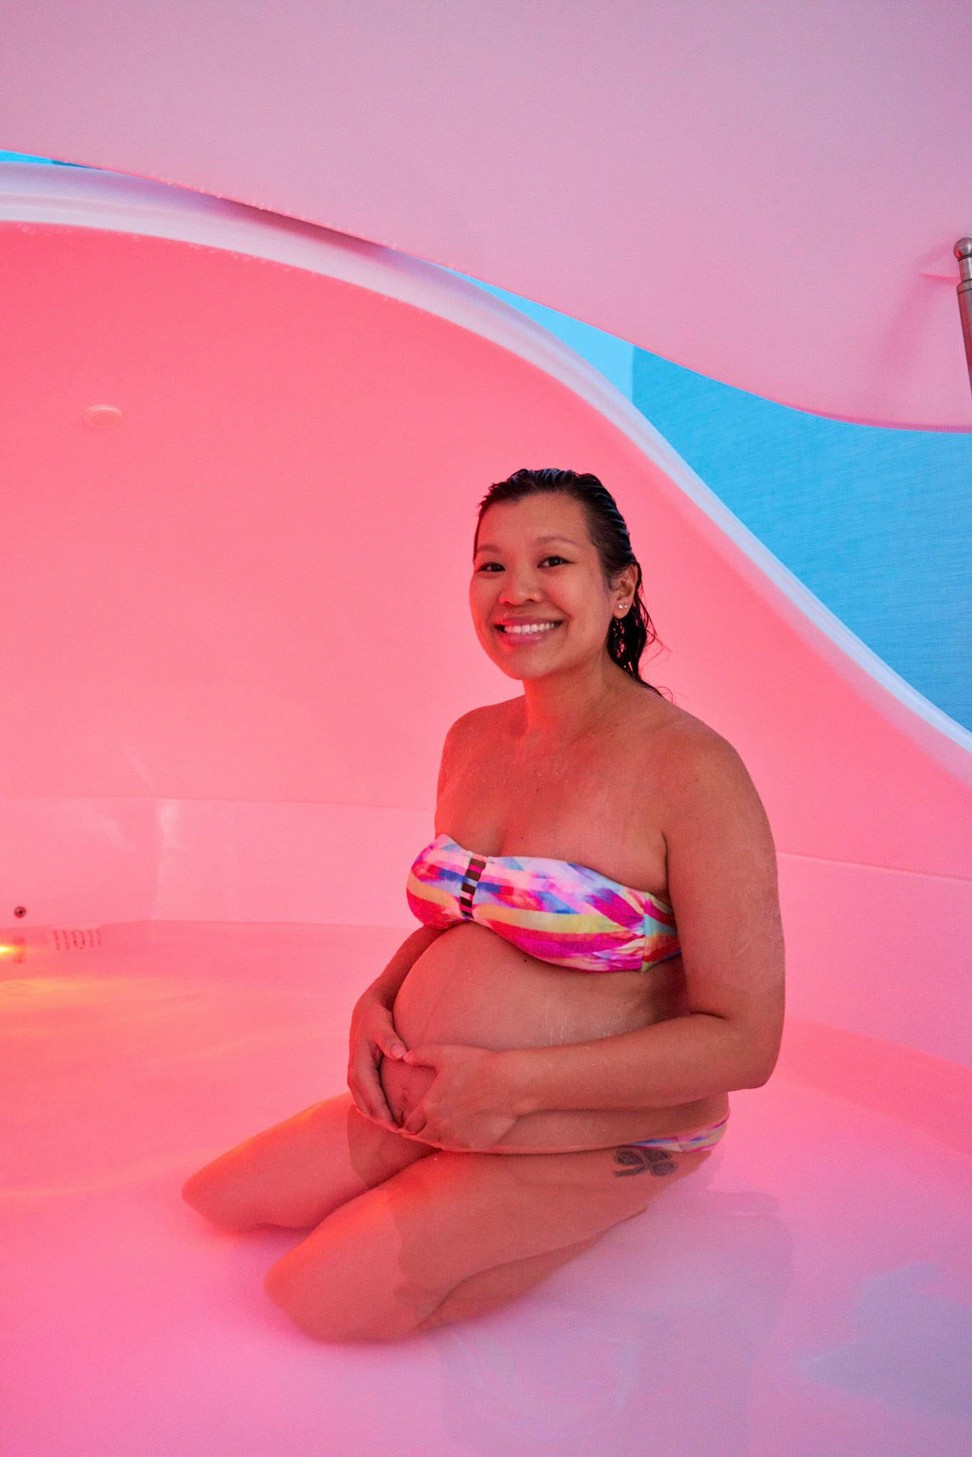 Cheung says yoga and time in a flotation tank helped her to stay calm while giving birth during a health crisis. Photo: Berton Chang Photography